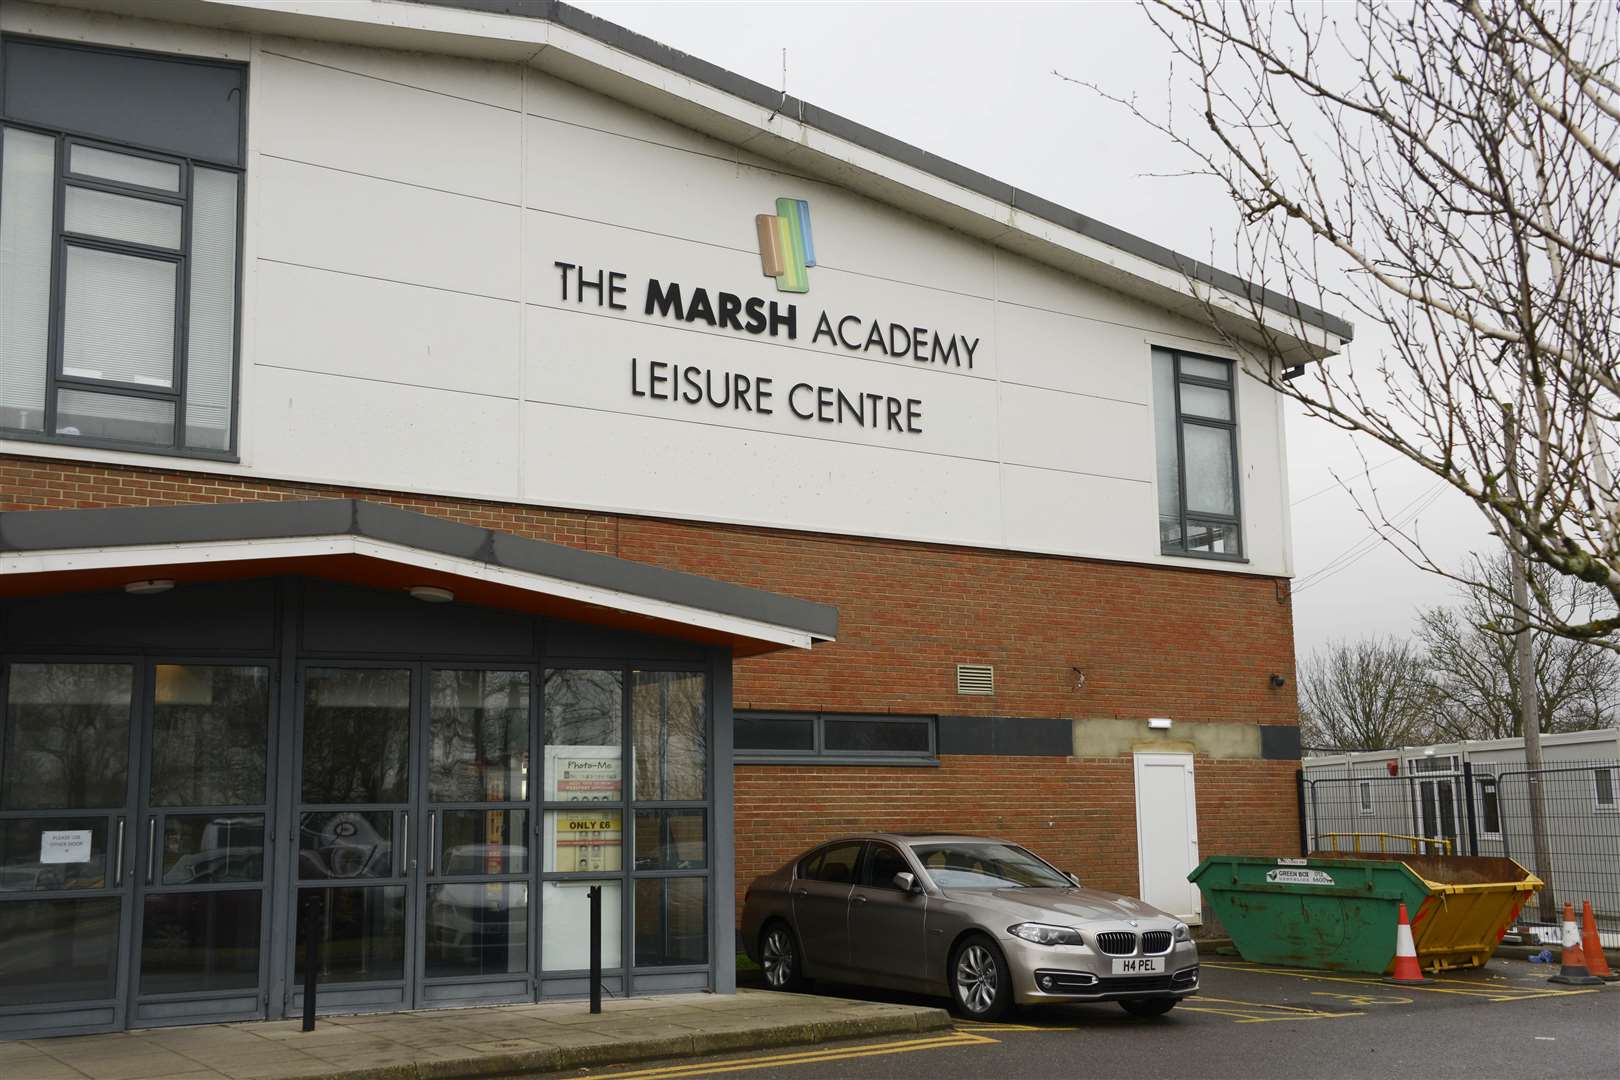 The cinema, being built in the Marsh Academy's leisure centre, will be the only one on the Marsh. Picture: Paul Amos